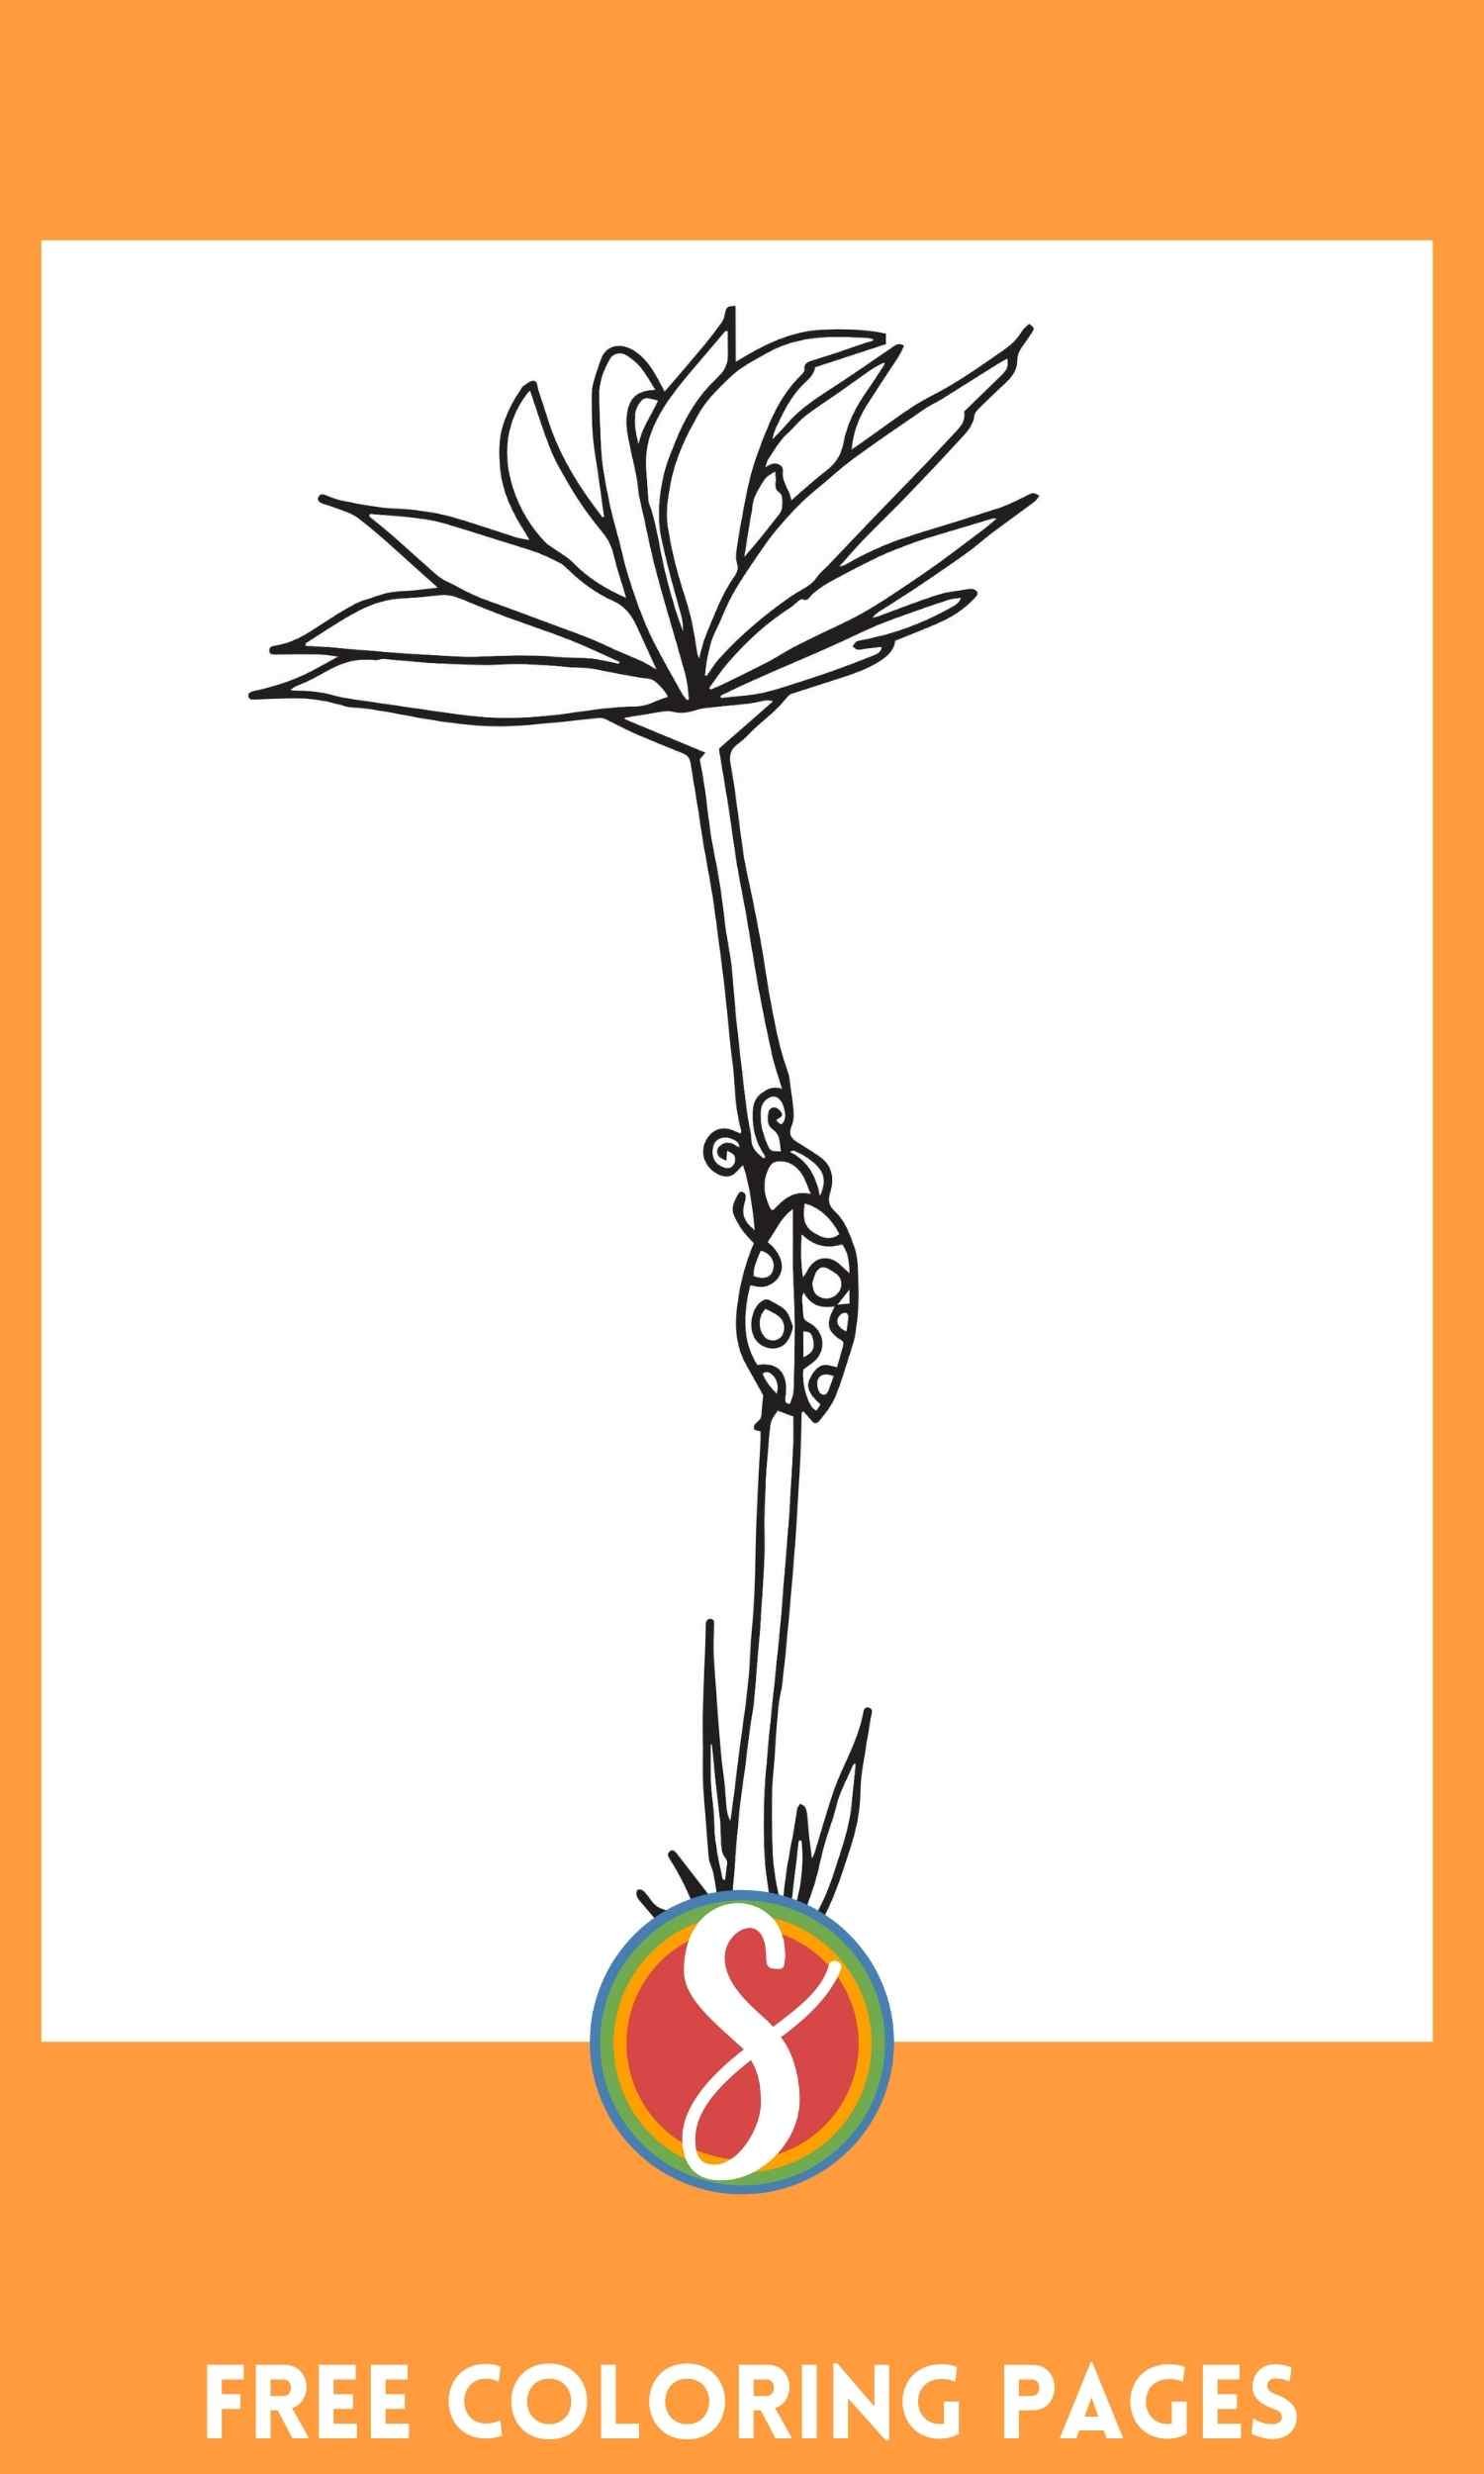 flower coloring page with long-stemmed flower and ladybug crawling up